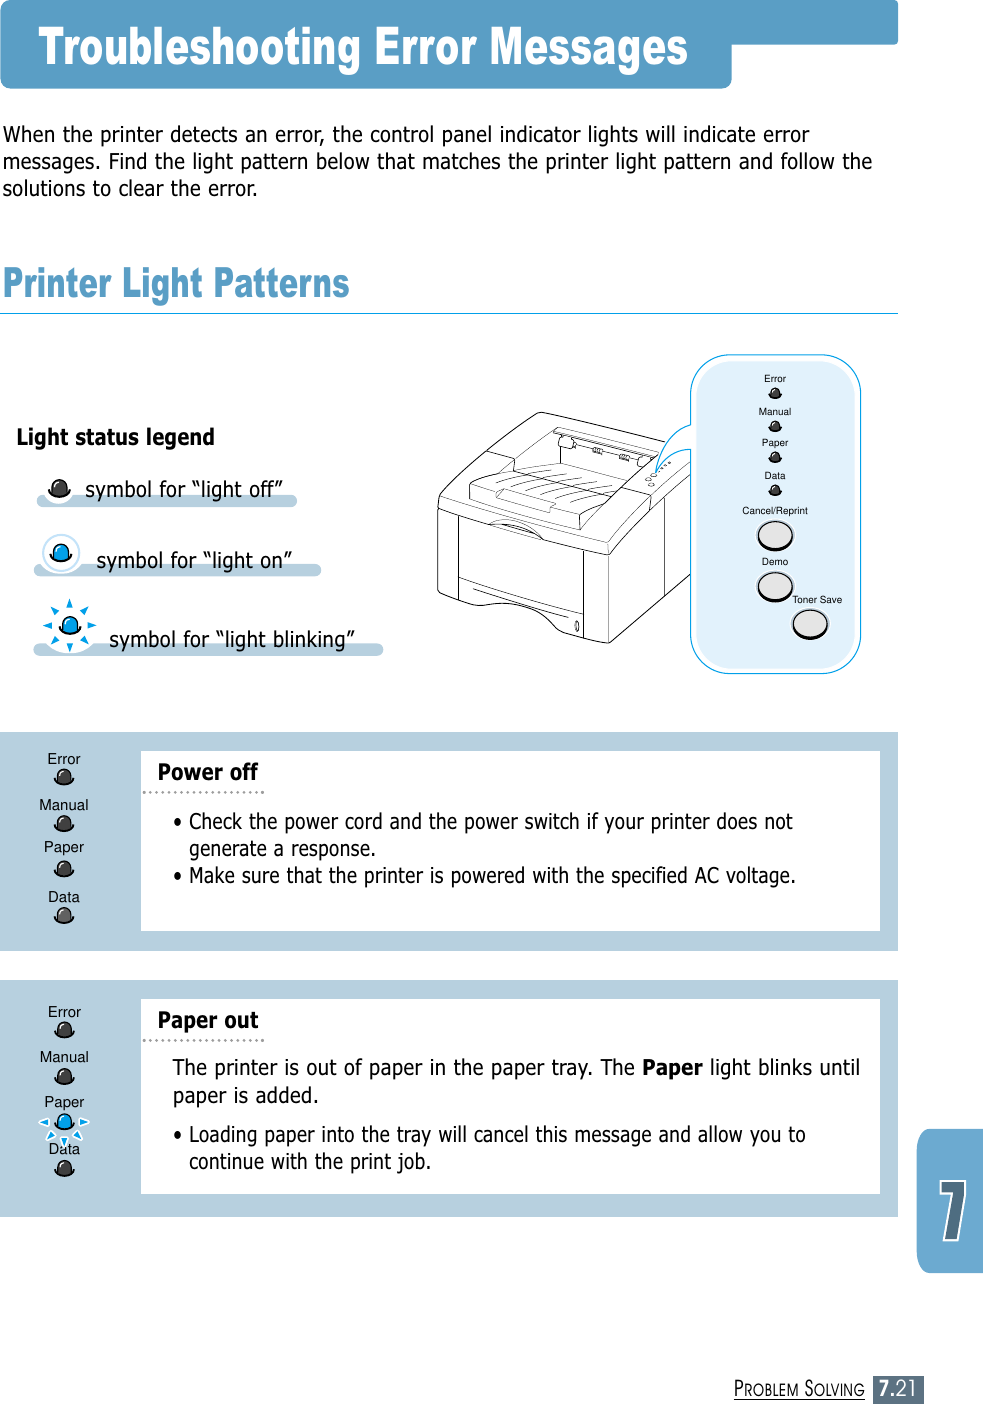 7.21PROBLEM SOLVINGErrorManualPaperDataCancel/ReprintDemoToner SaveWhen the printer detects an error, the control panel indicator lights will indicate errormessages. Find the light pattern below that matches the printer light pattern and follow thesolutions to clear the error.Troubleshooting Error MessagesPrinter Light PatternsLight status legendsymbol for “light on”• Check the power cord and the power switch if your printer does notgenerate a response.• Make sure that the printer is powered with the specified AC voltage.Power offErrorManualPaperDataThe printer is out of paper in the paper tray. The Paper light blinks untilpaper is added.• Loading paper into the tray will cancel this message and allow you tocontinue with the print job. Paper out DataErrorManualPapersymbol for “light blinking”symbol for “light off”